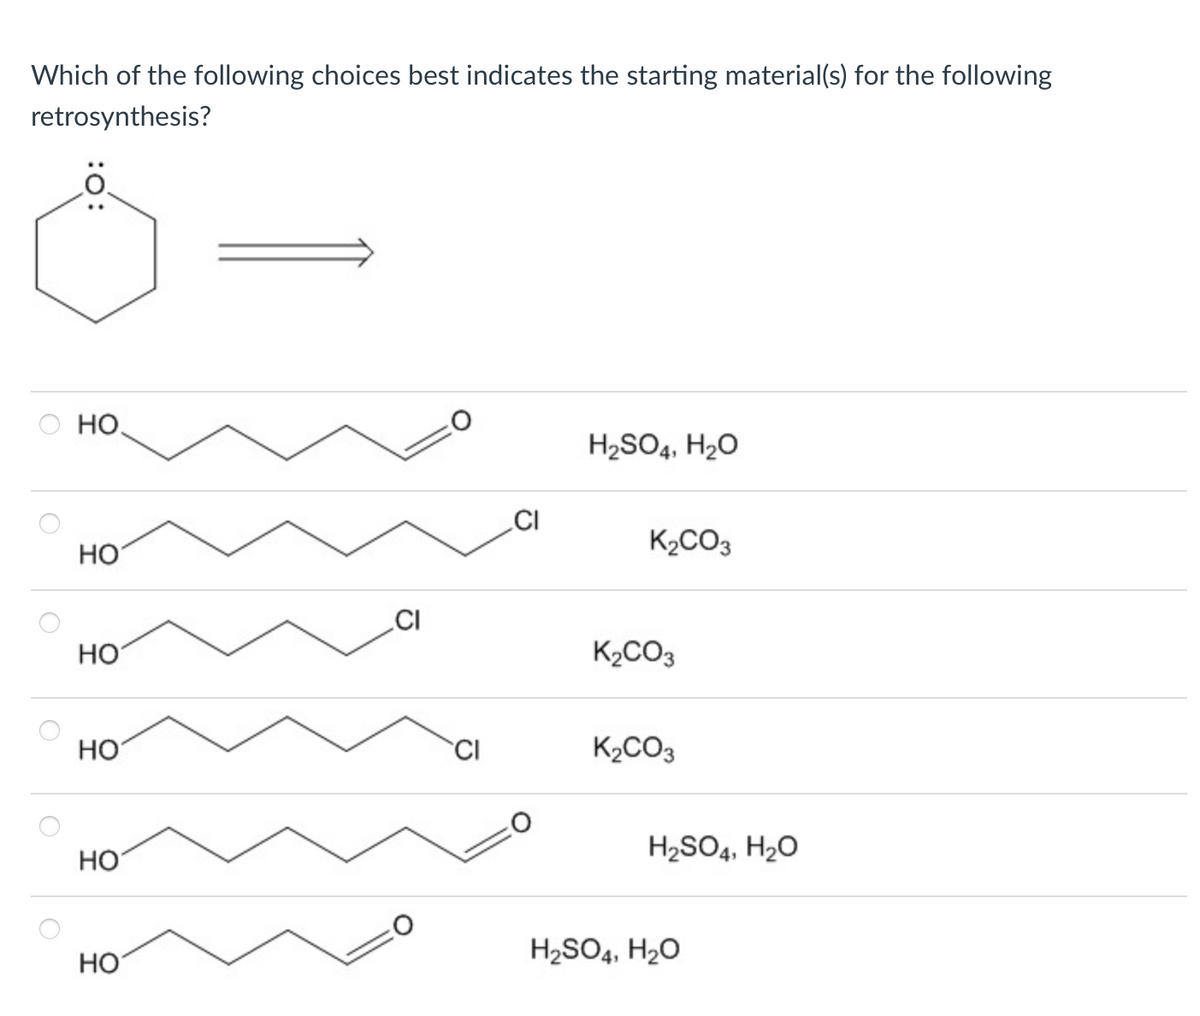 Which of the following choices best indicates the starting material(s) for the following
retrosynthesis?
:0:
HO
H2SO4, H₂O
CI
K2CO3
HO
CI
HO
K2CO3
HO
CI
K2CO3
H2SO4, H₂O
HO
O
H2SO4, H₂O
HO